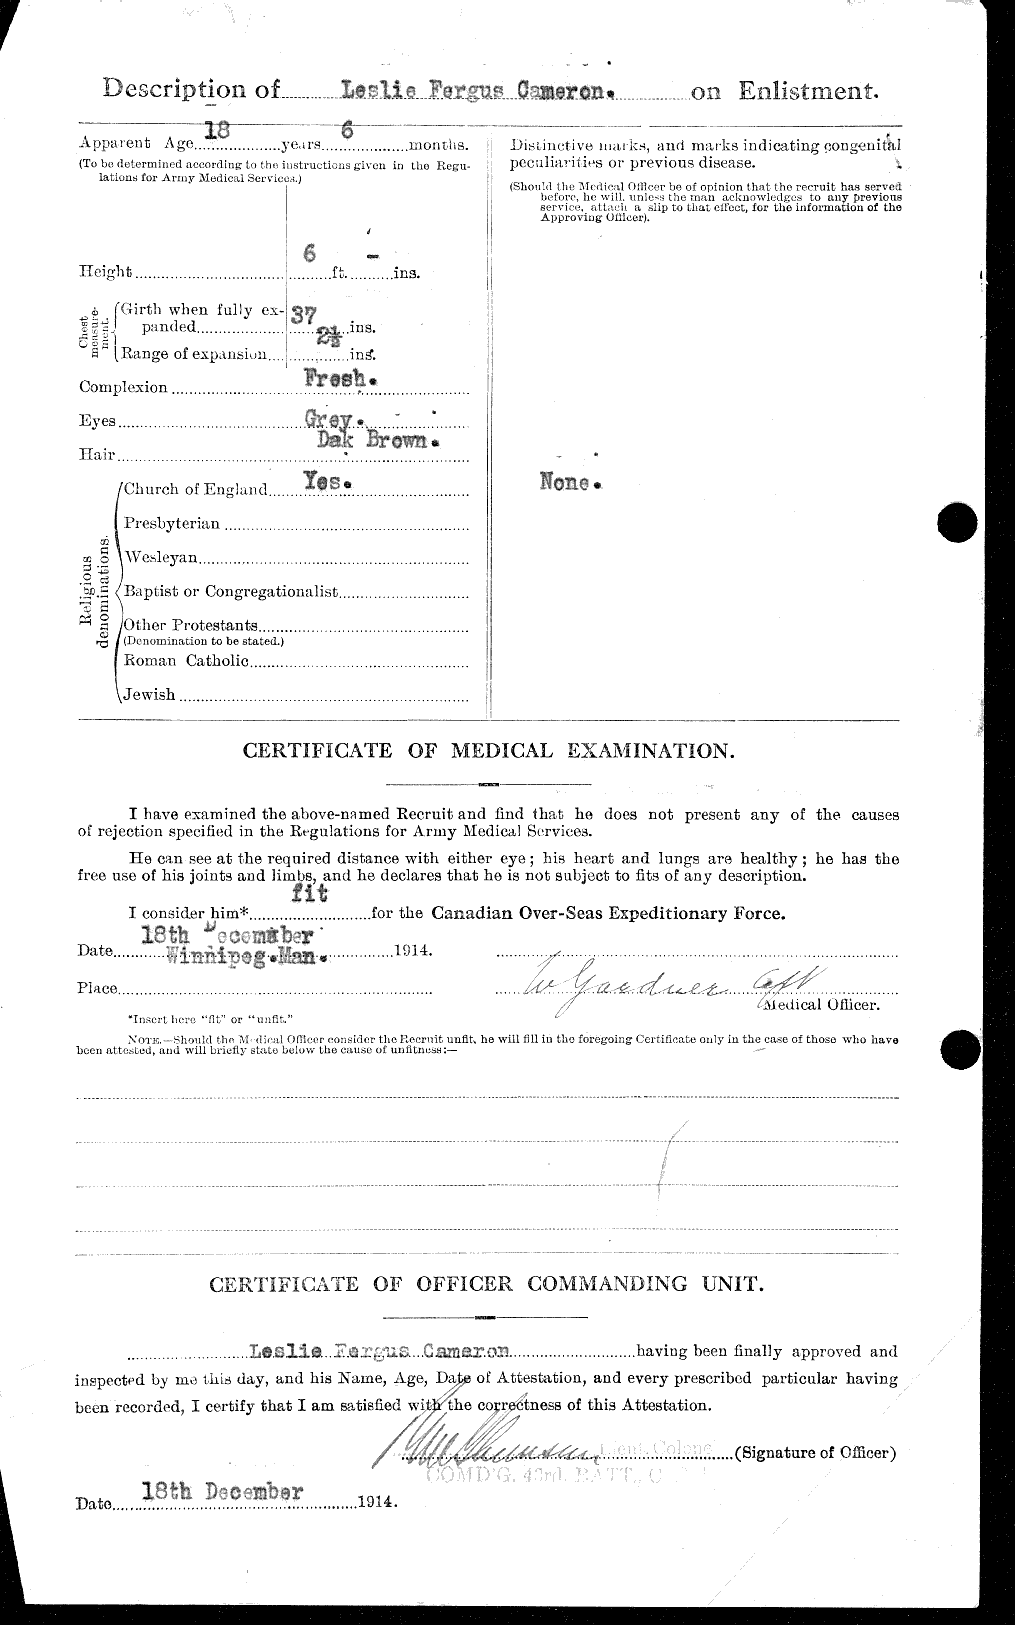 Personnel Records of the First World War - CEF 002394b